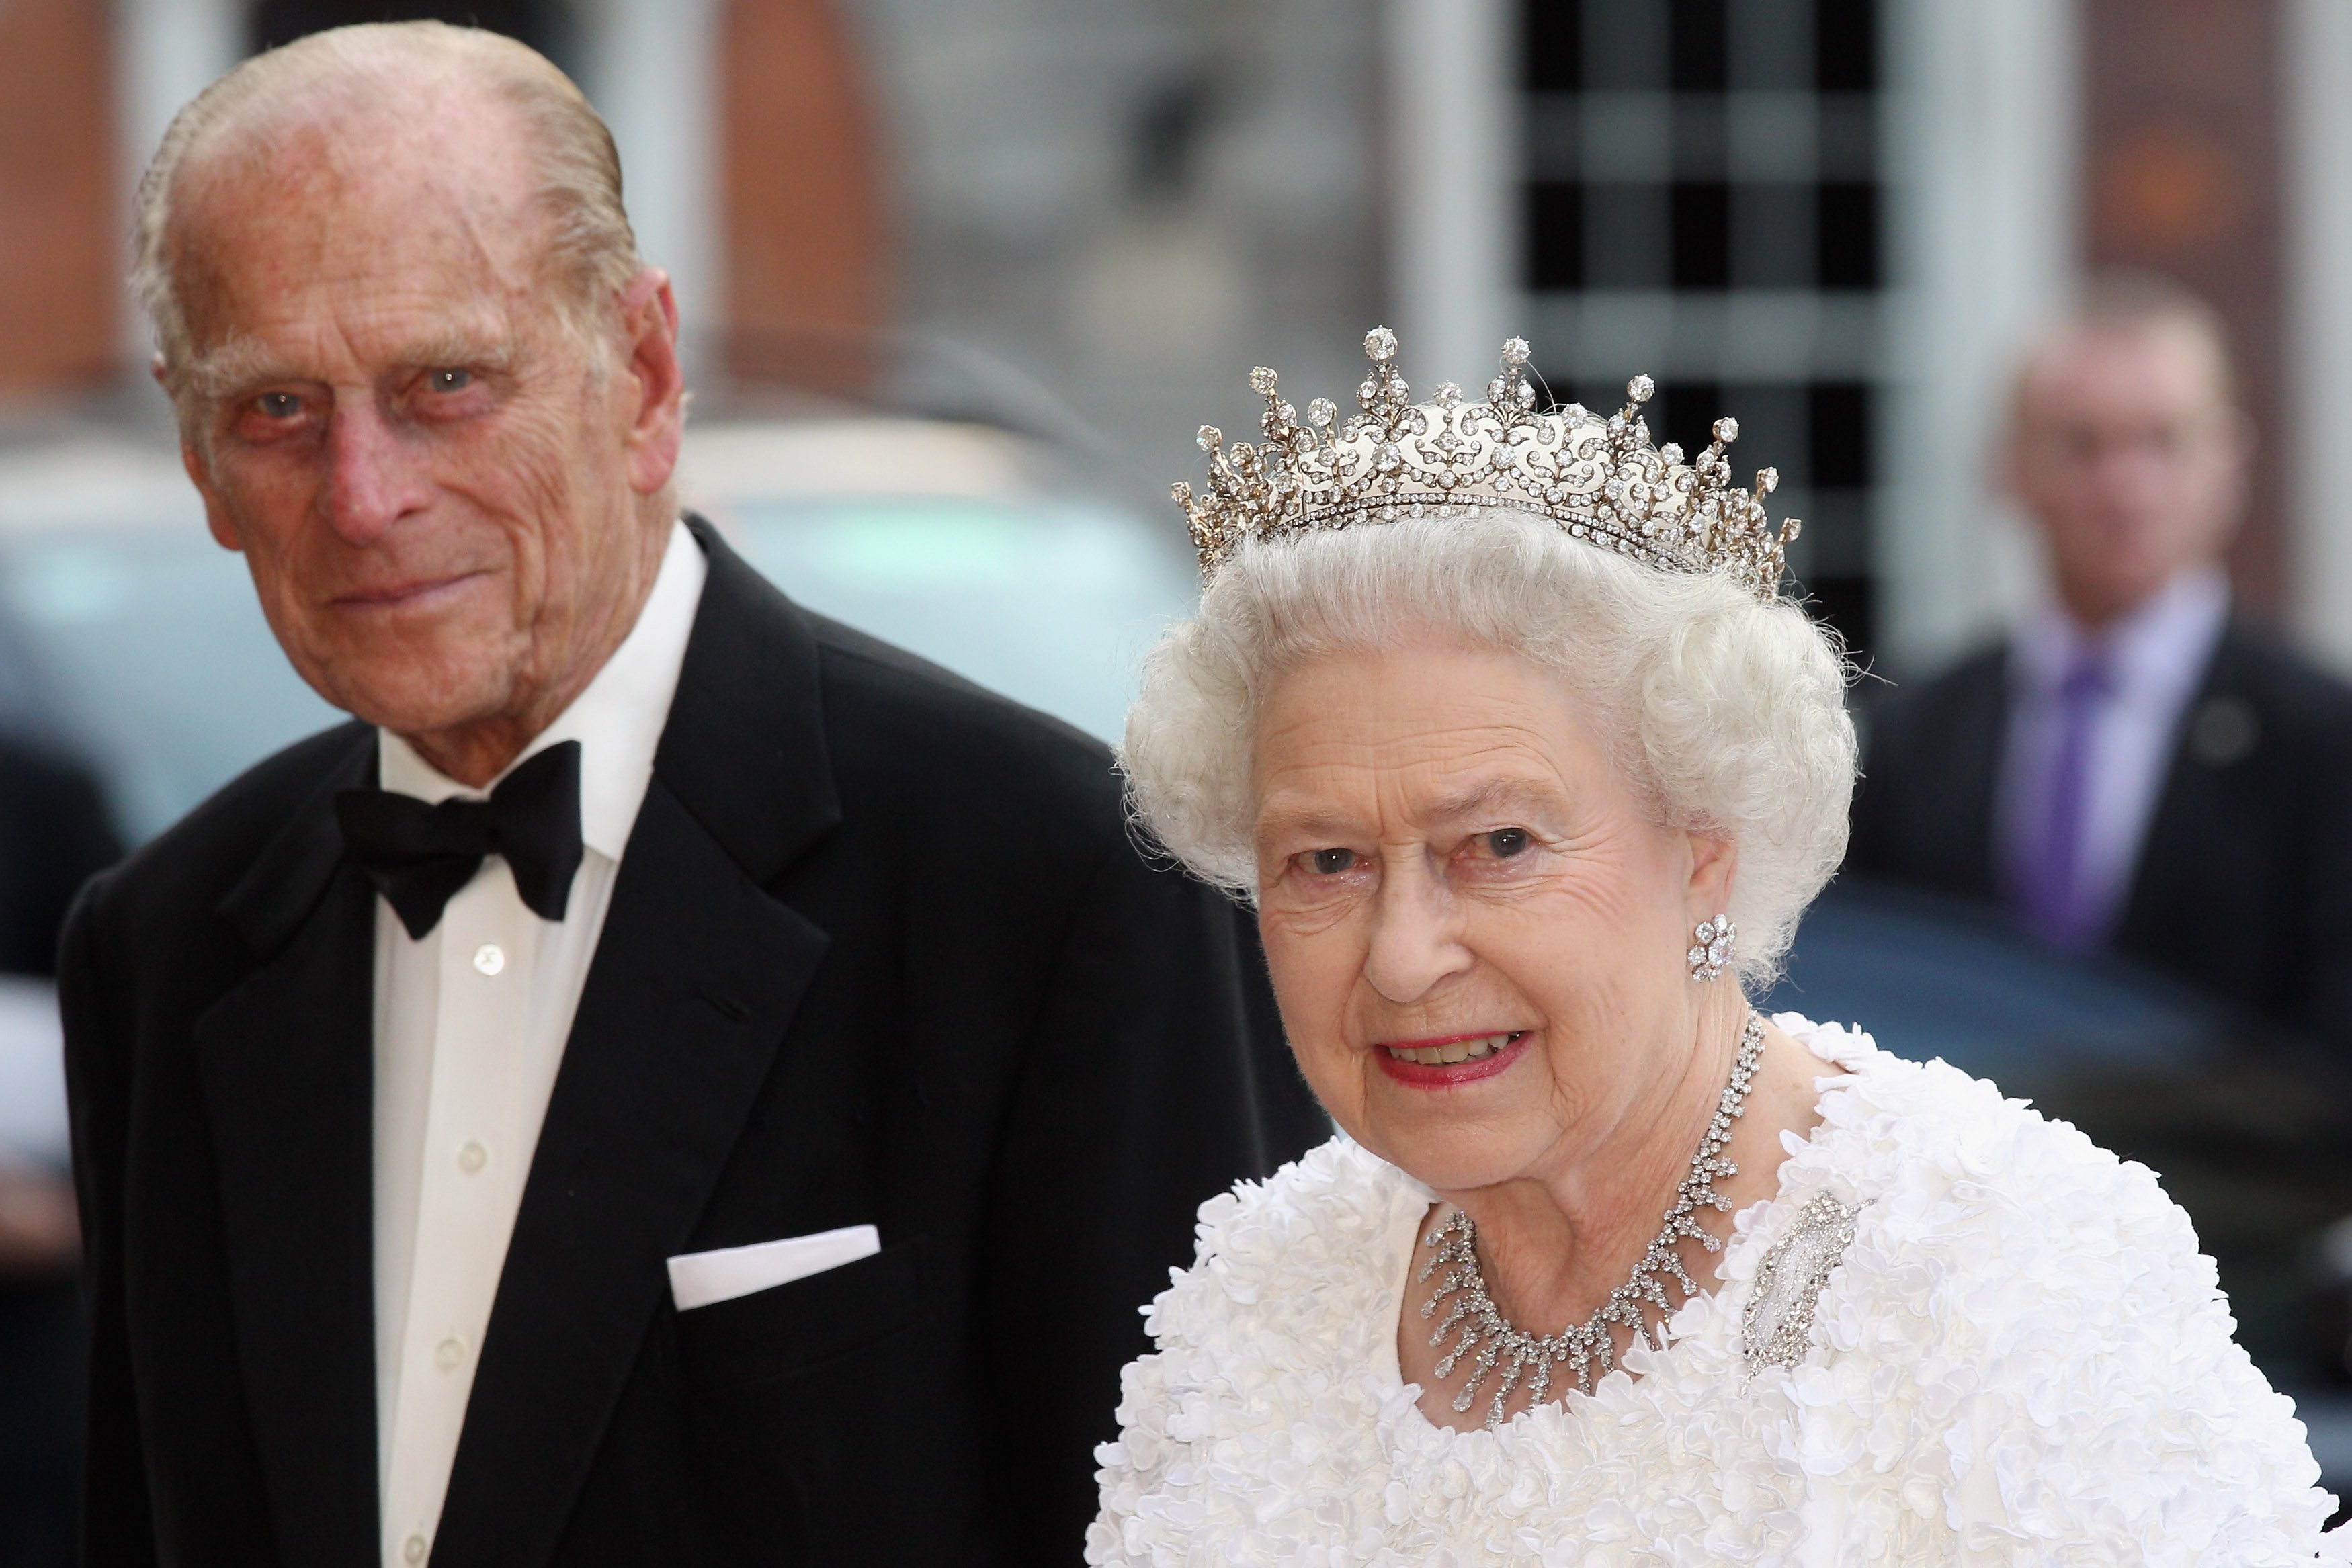 Queen Elizabeth II and Prince Philip arrive to attend a State Banquet in Dublin Castle on May 18, 2011 in Dublin, Ireland. | Source: Getty Images